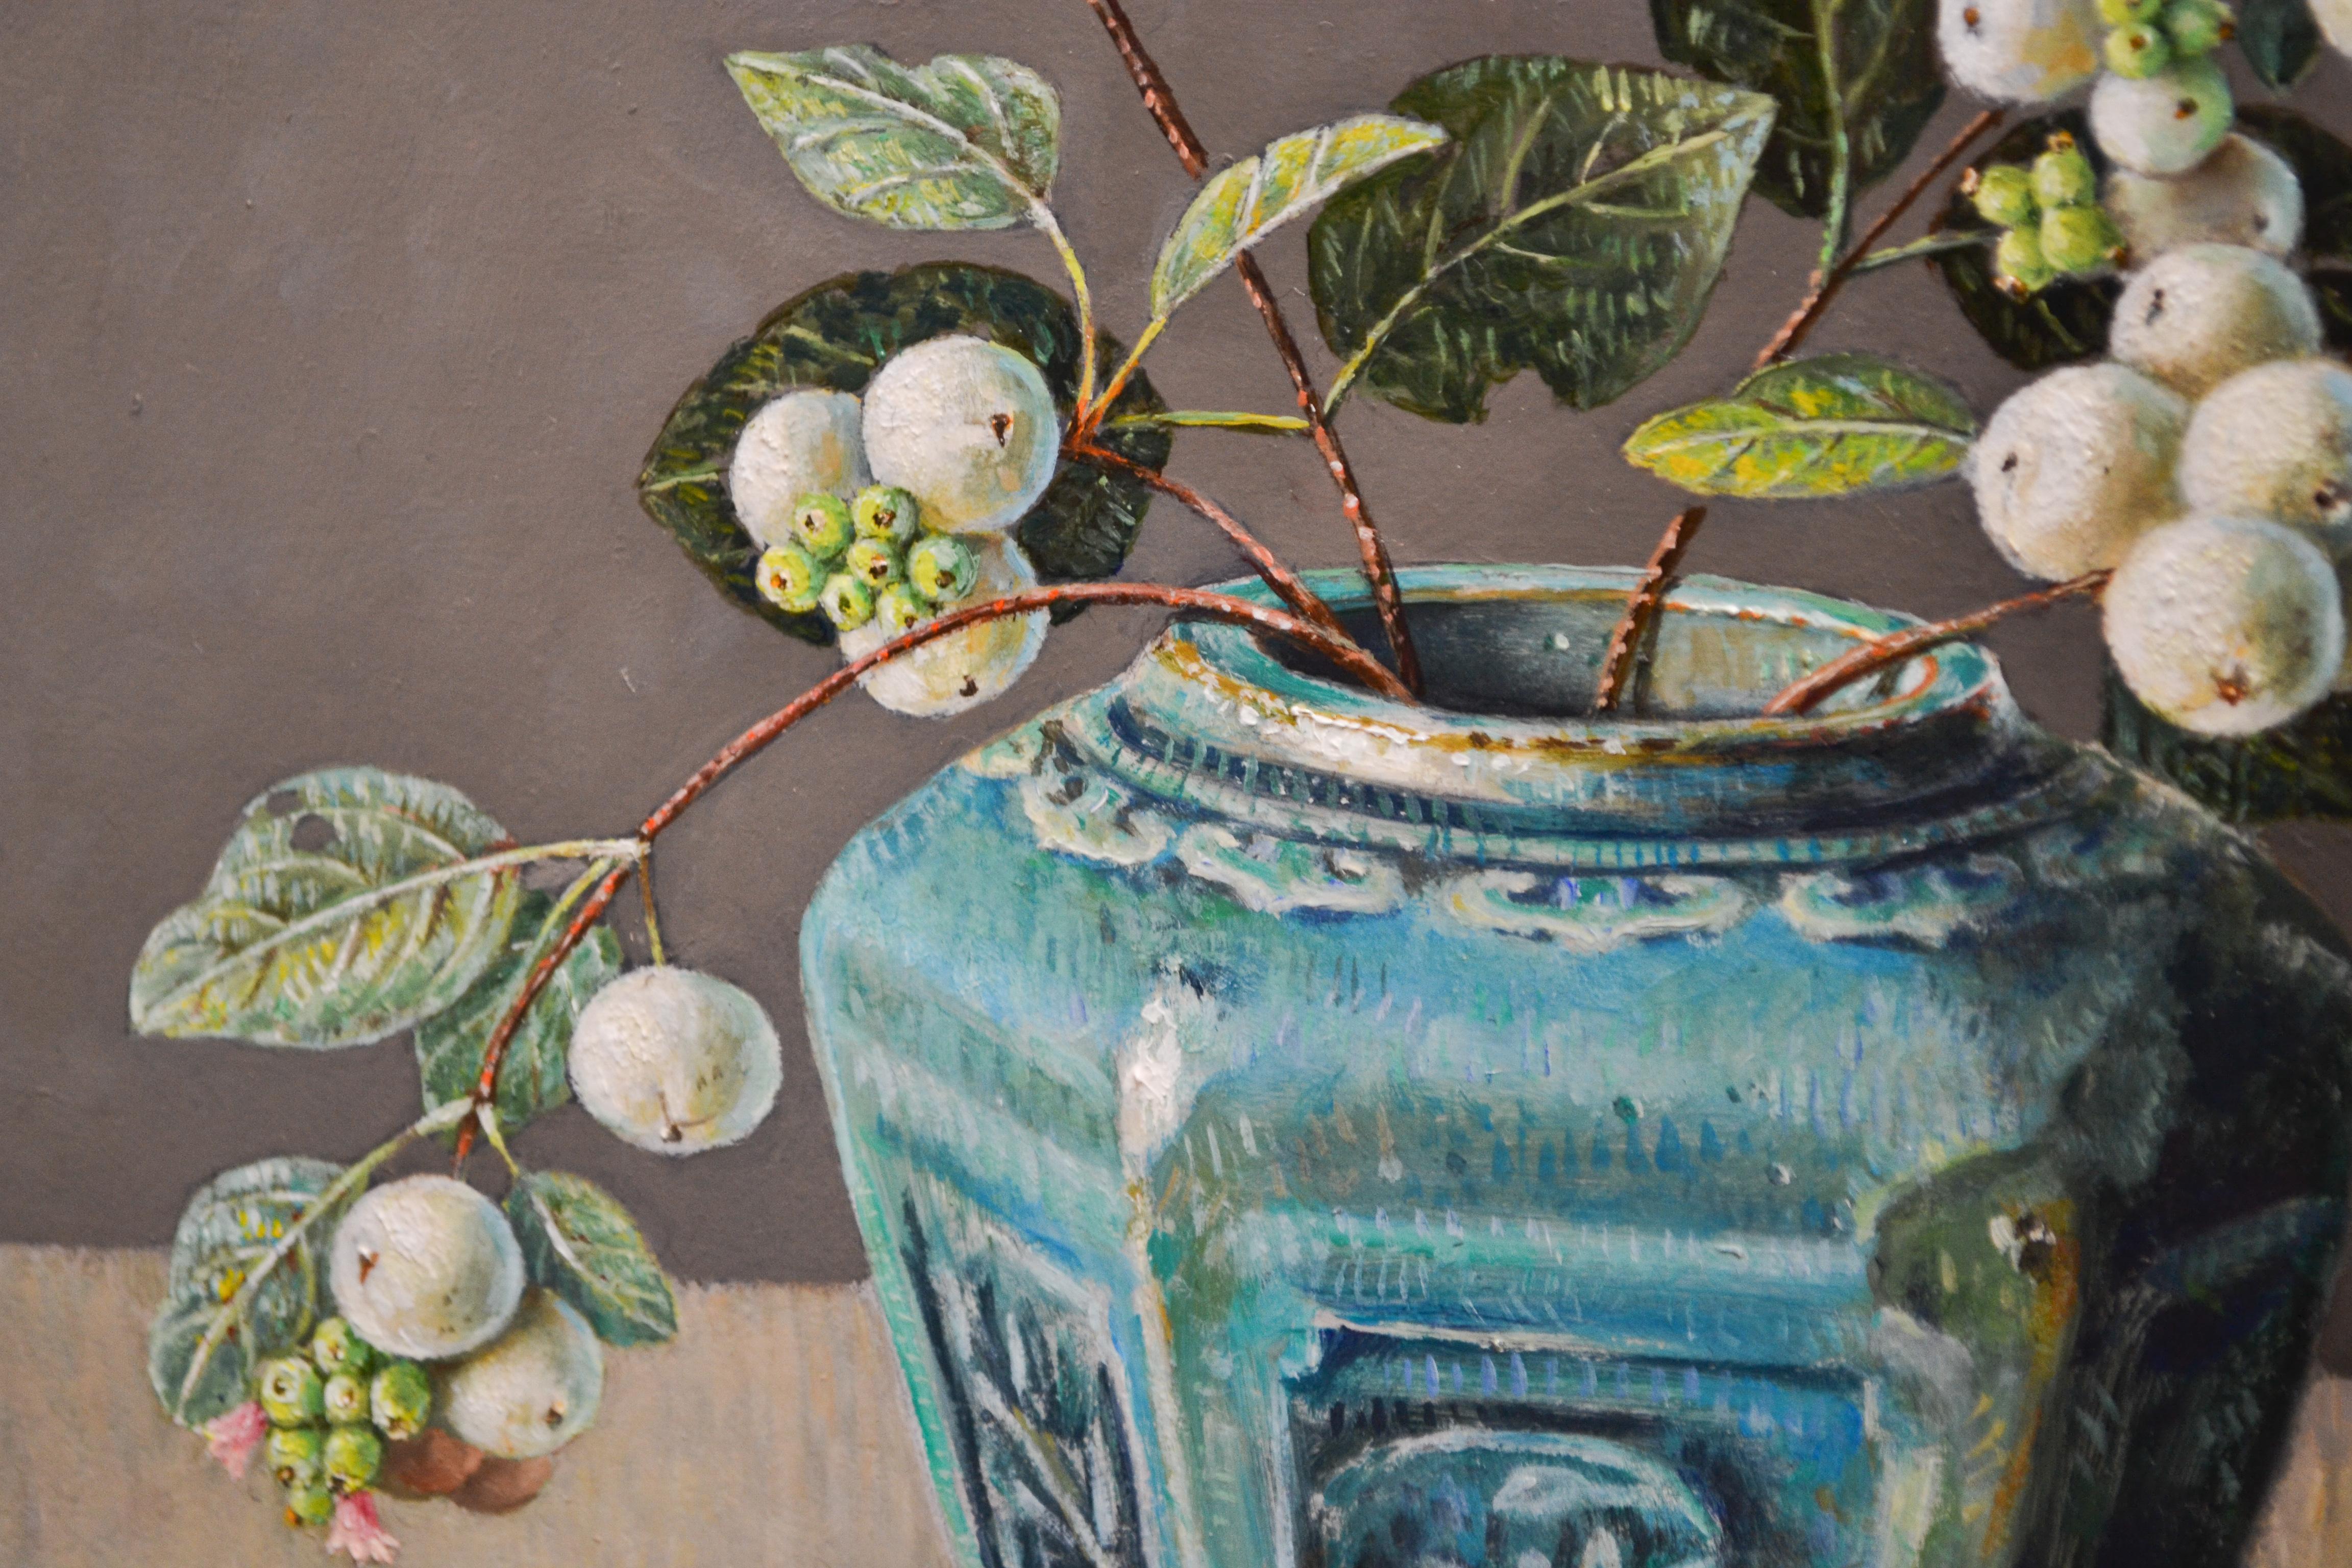 Snowberries in Green Ginger Jar, Ingrid Smuling, 21st Century Contemporary 2